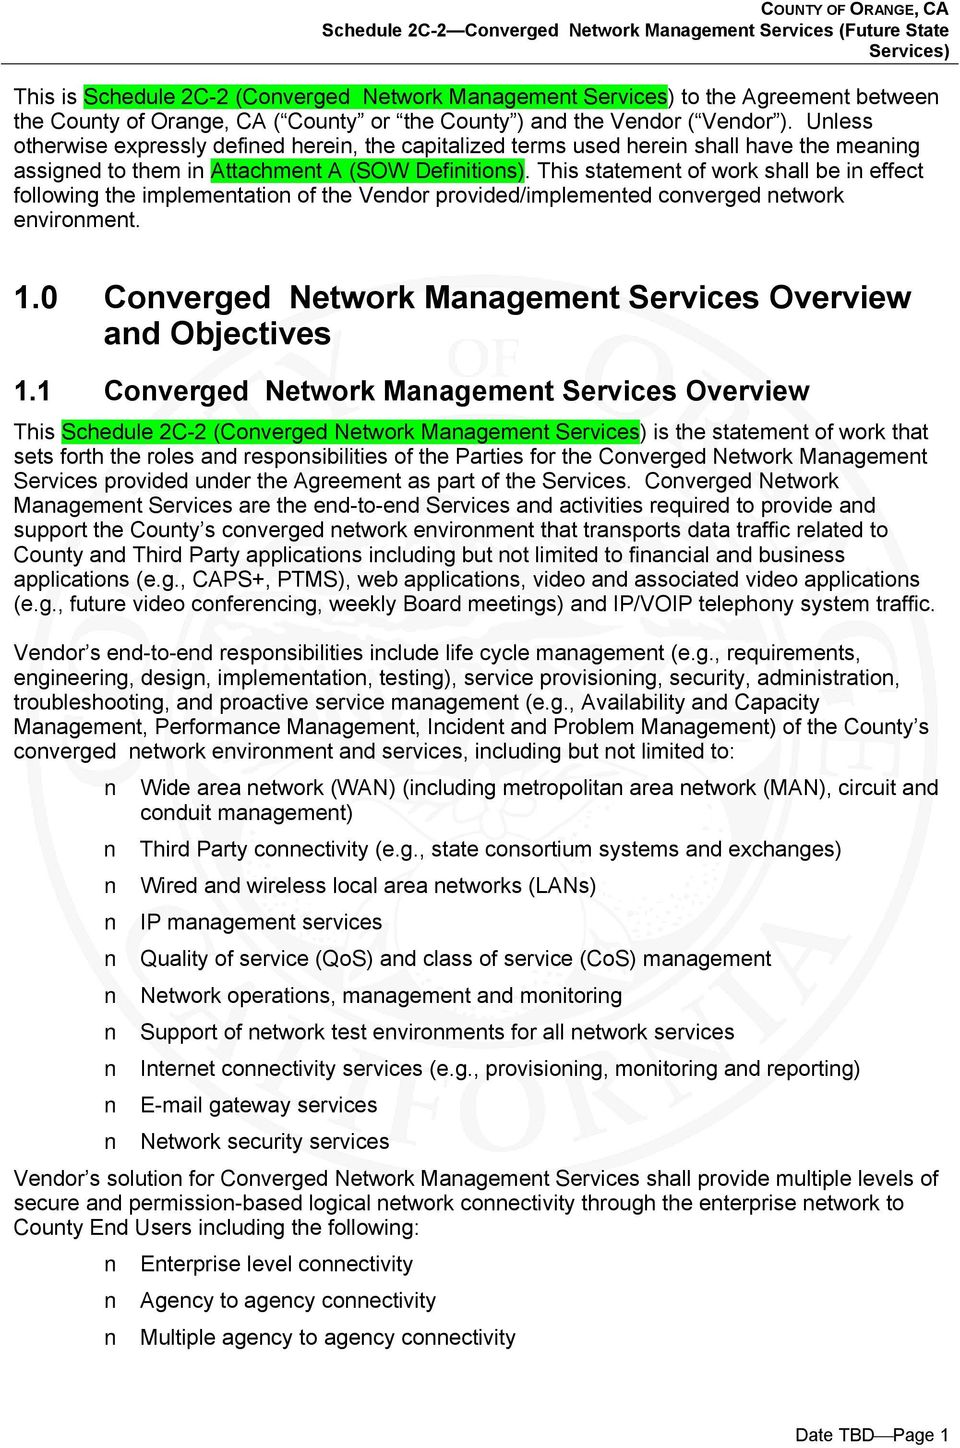 This statement of work shall be in effect following the implementation of the Vendor provided/implemented converged network environment. 1.